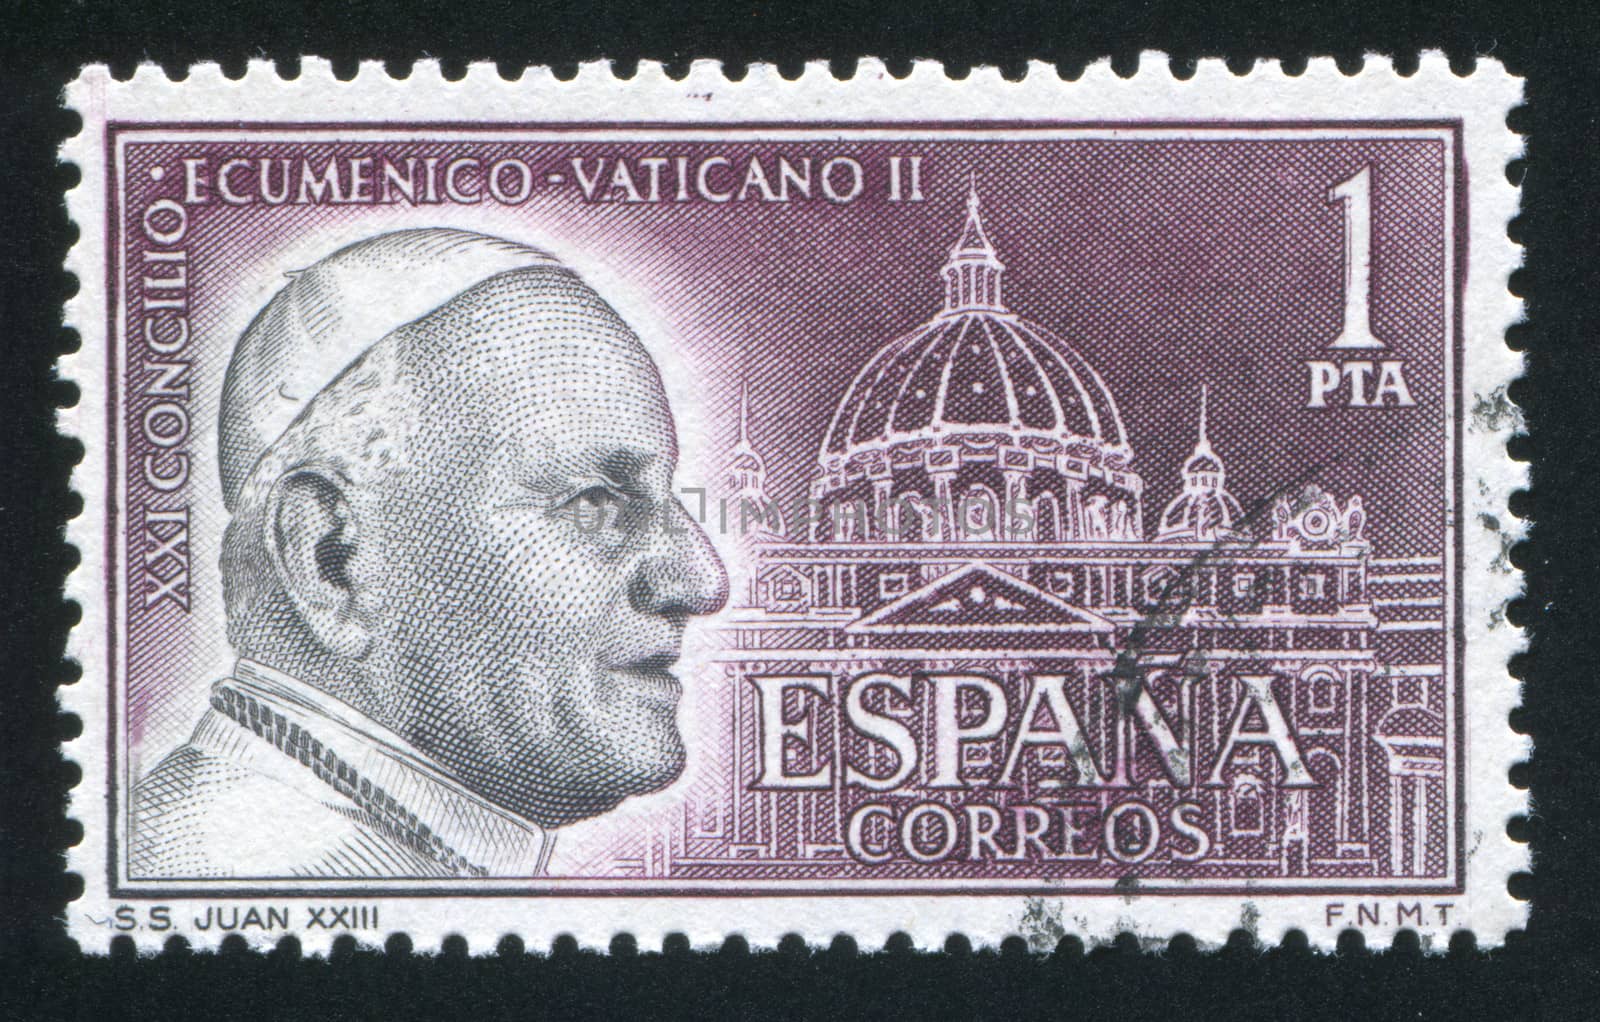 SPAIN - CIRCA 1962: stamp printed by Spain, shows Pope John XXIII and St. Peter���s Rome, circa 1962